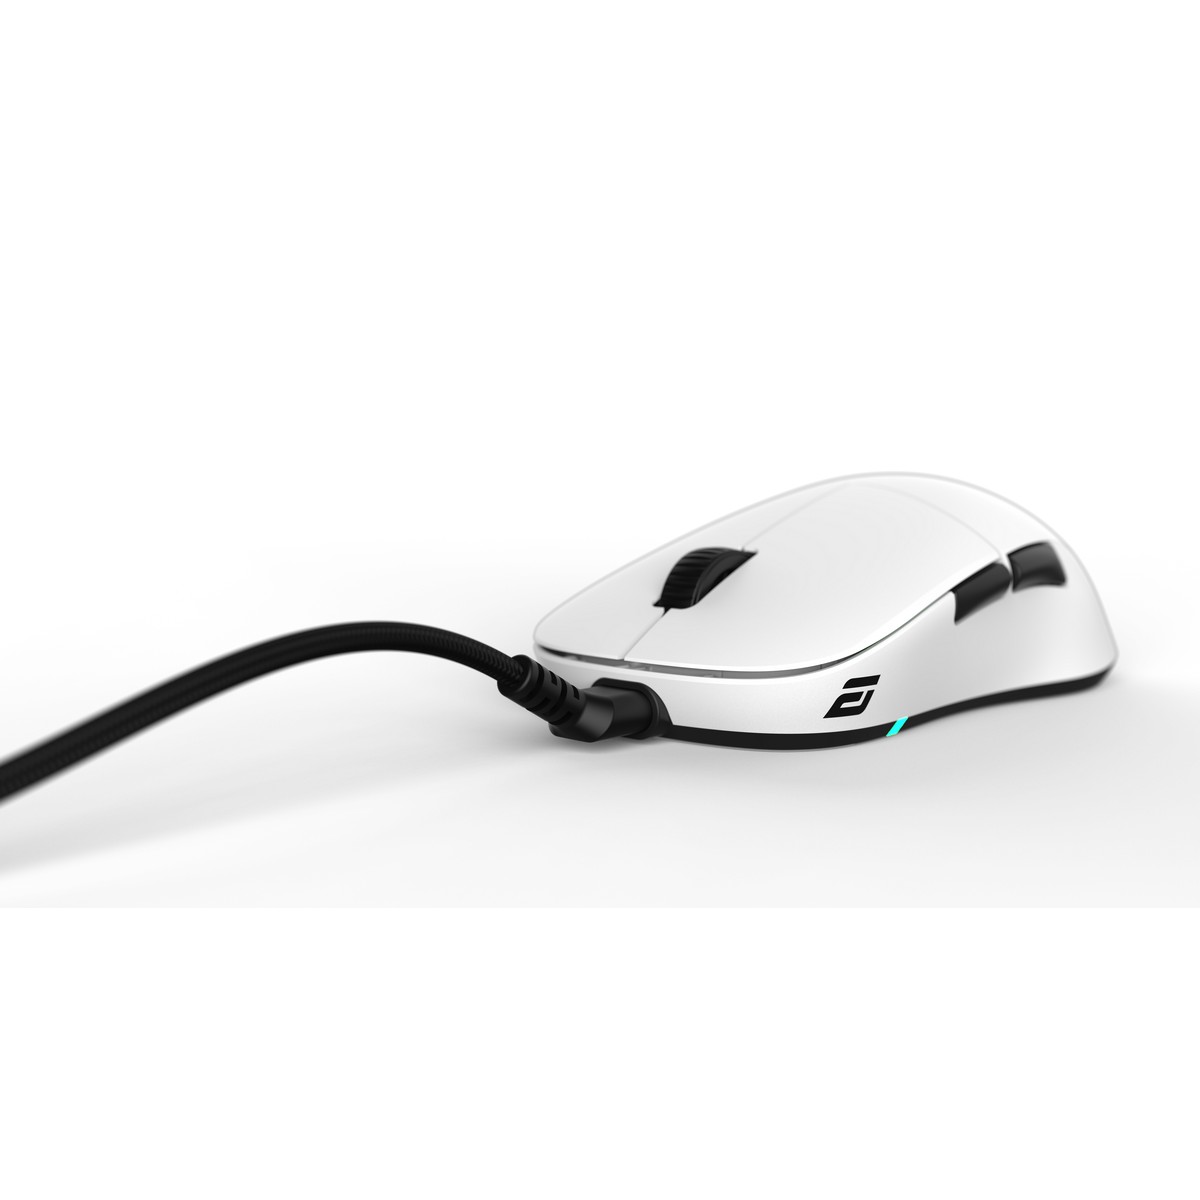 Endgame Gear XM2w Wireless Optical Lightweight Gaming Mouse 